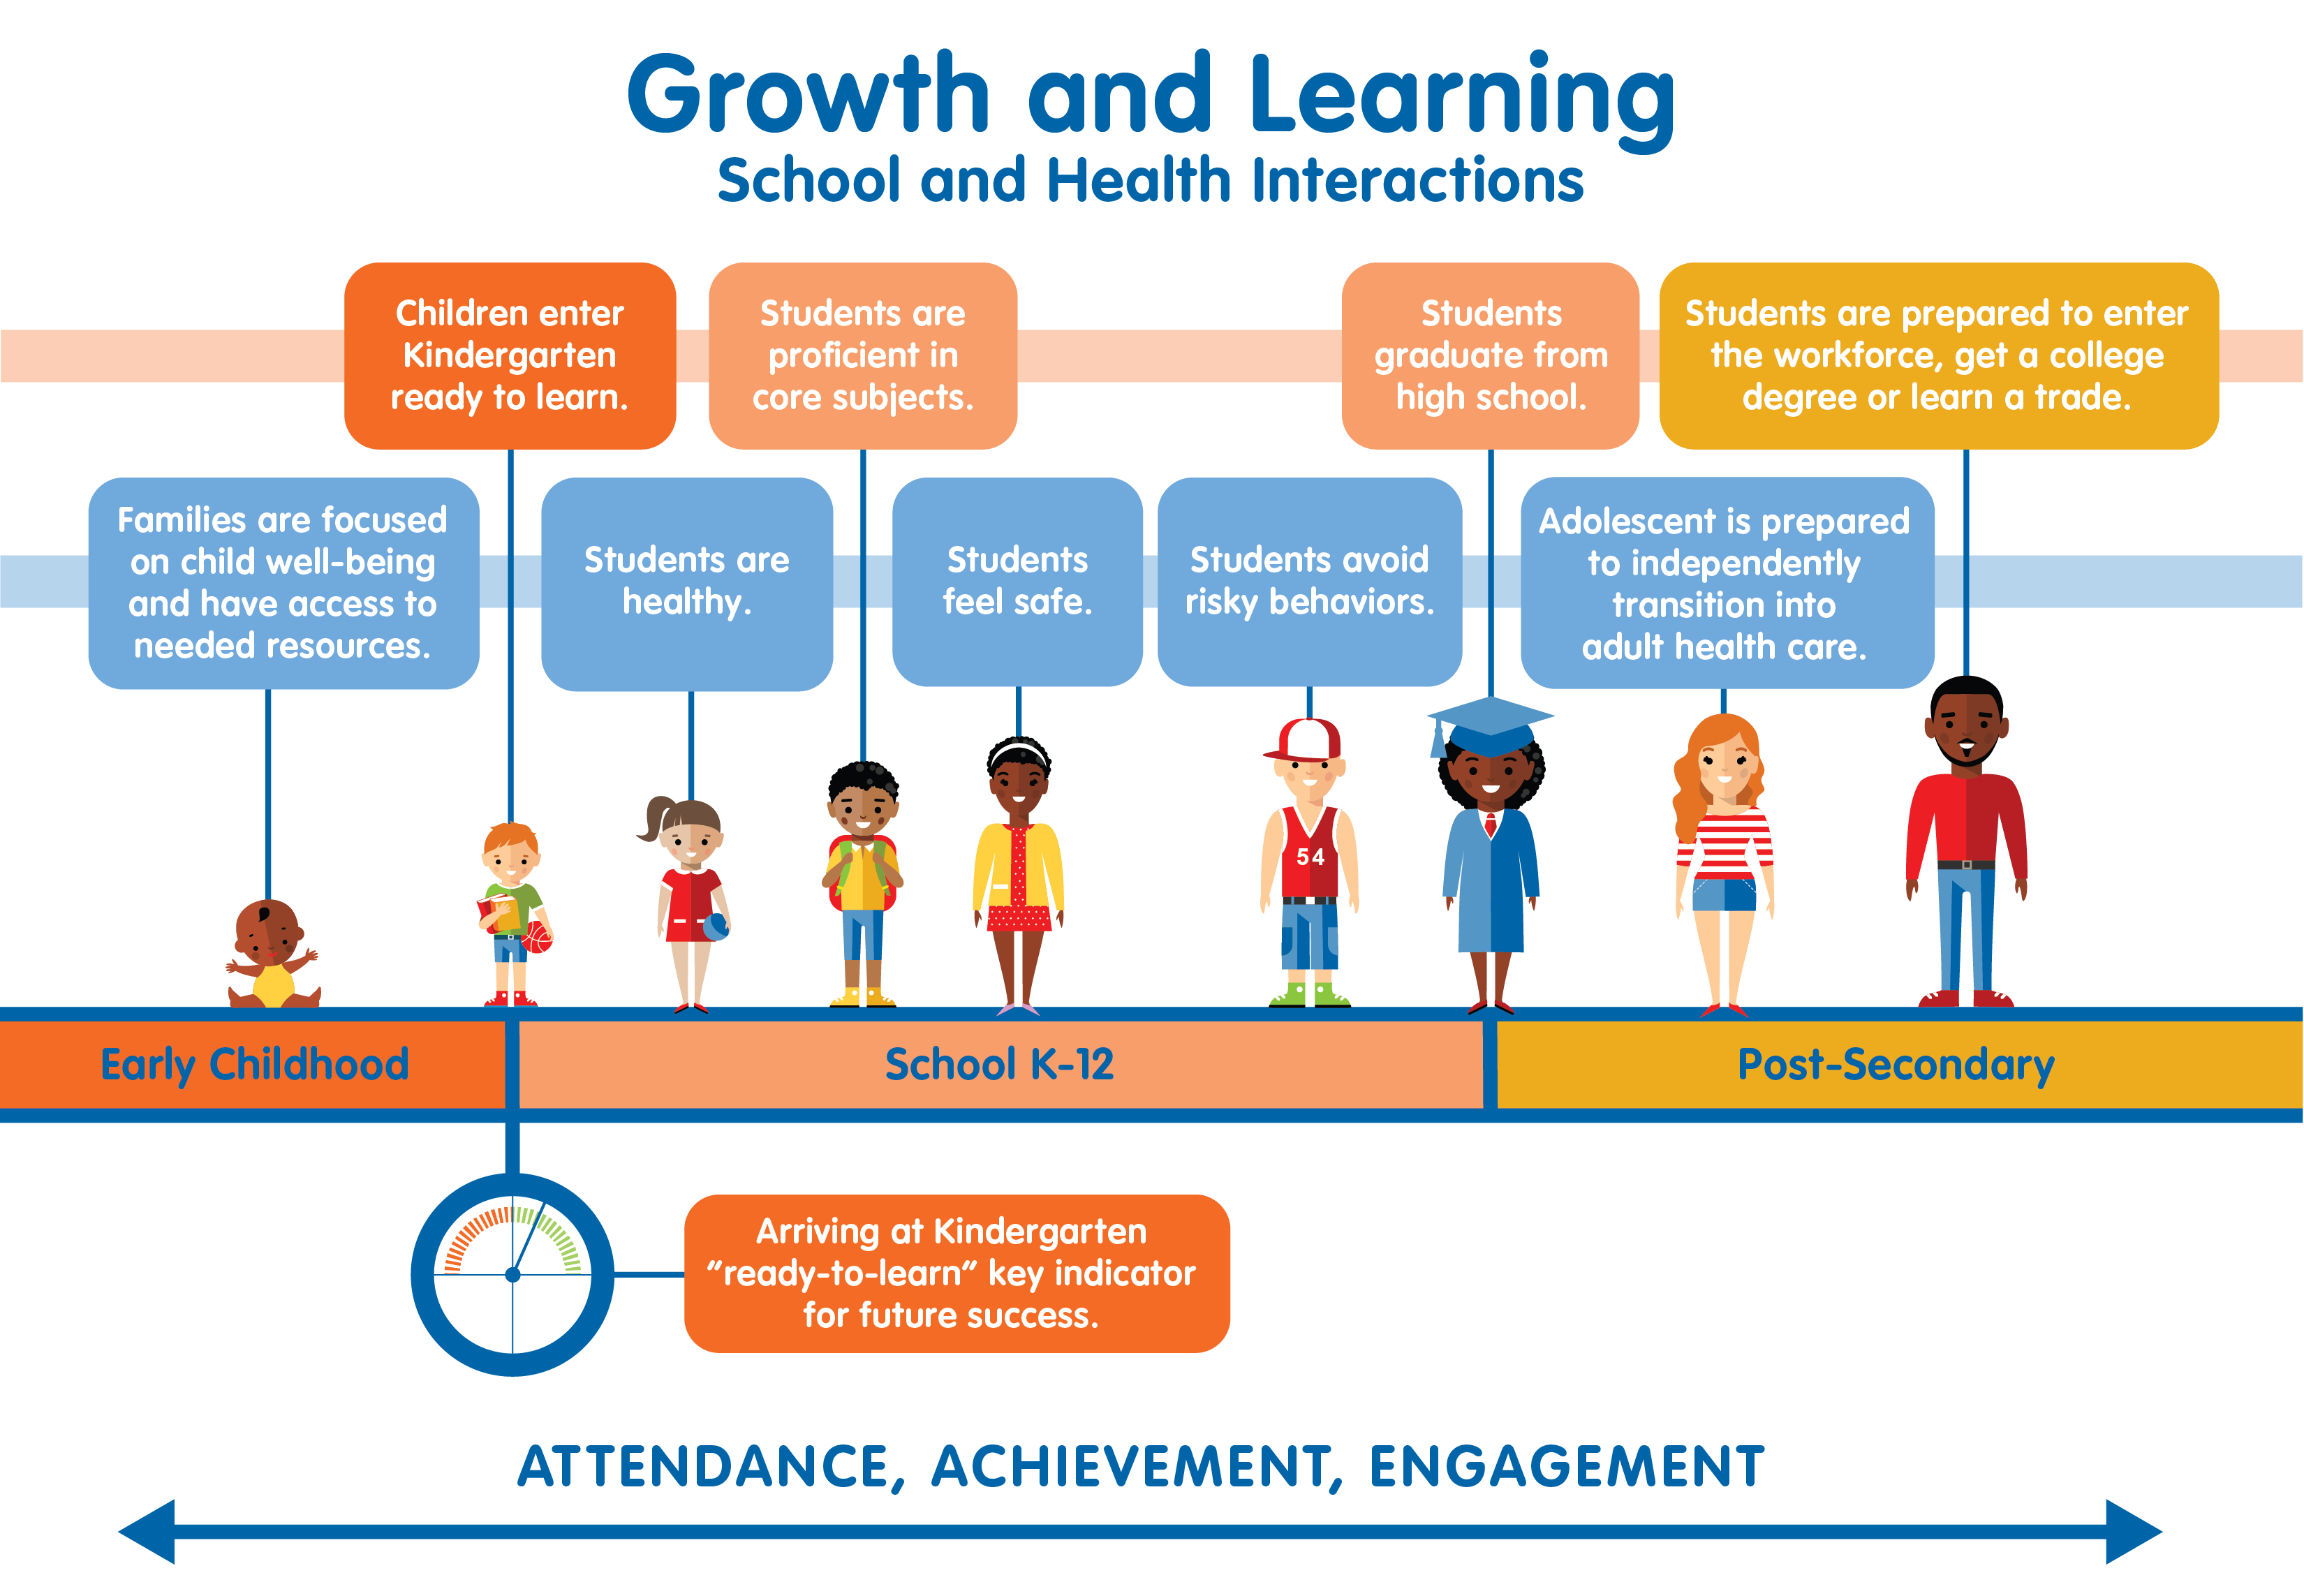 Graphic that shows "growth and learning school and health interactions" from early childhood to school K-12 to post-secondary.